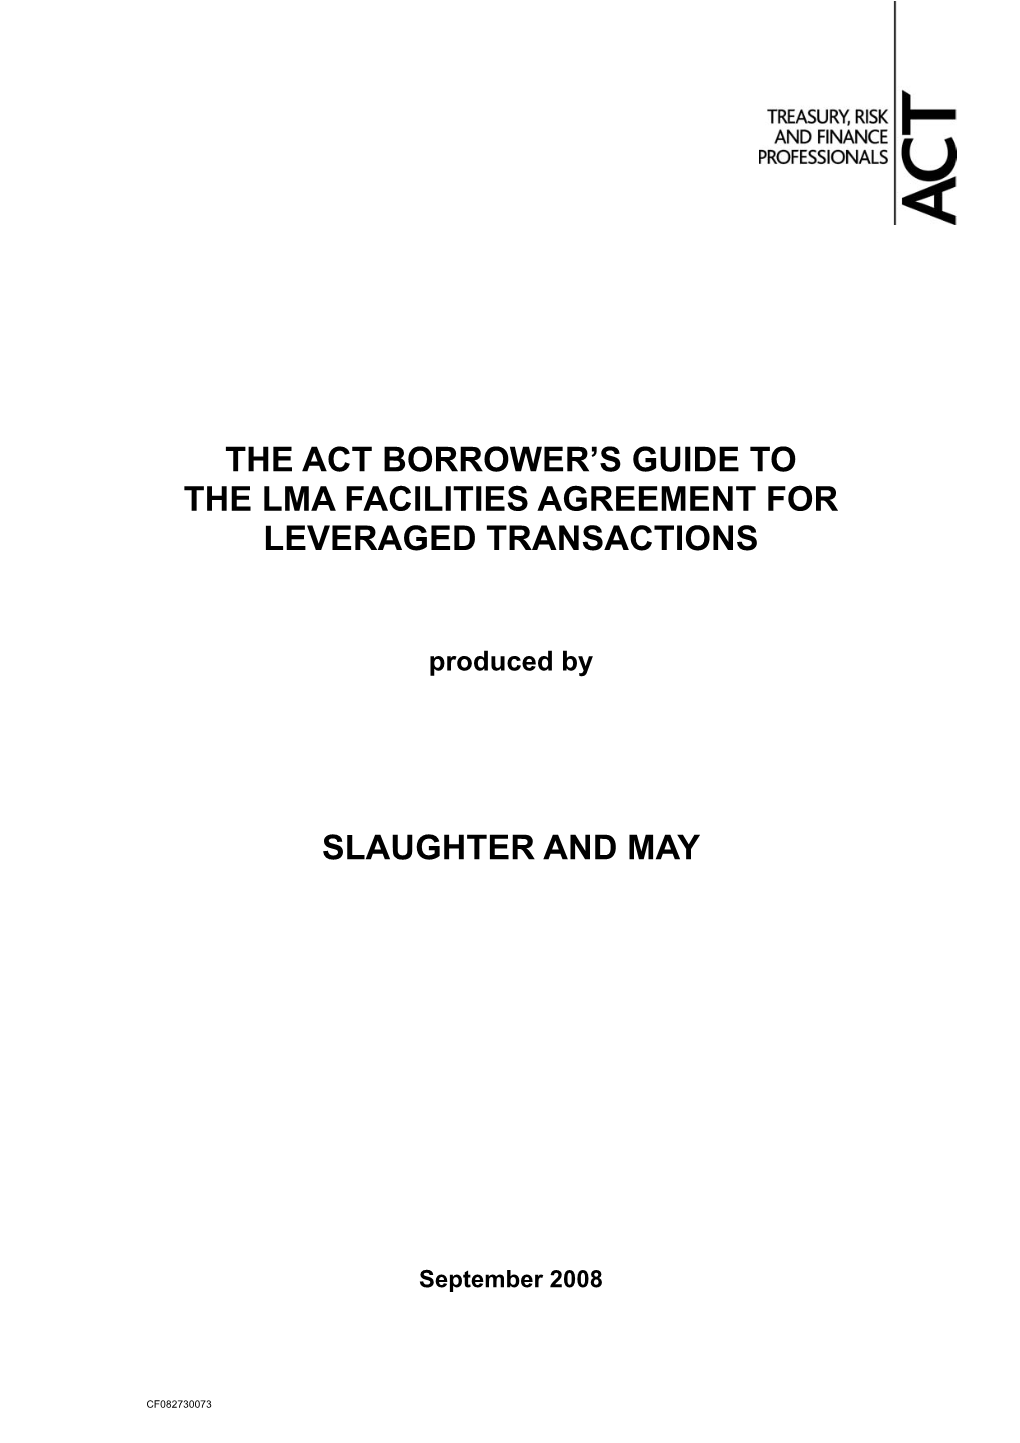 The Act Borrower's Guide to the Lma Facilities Agreement